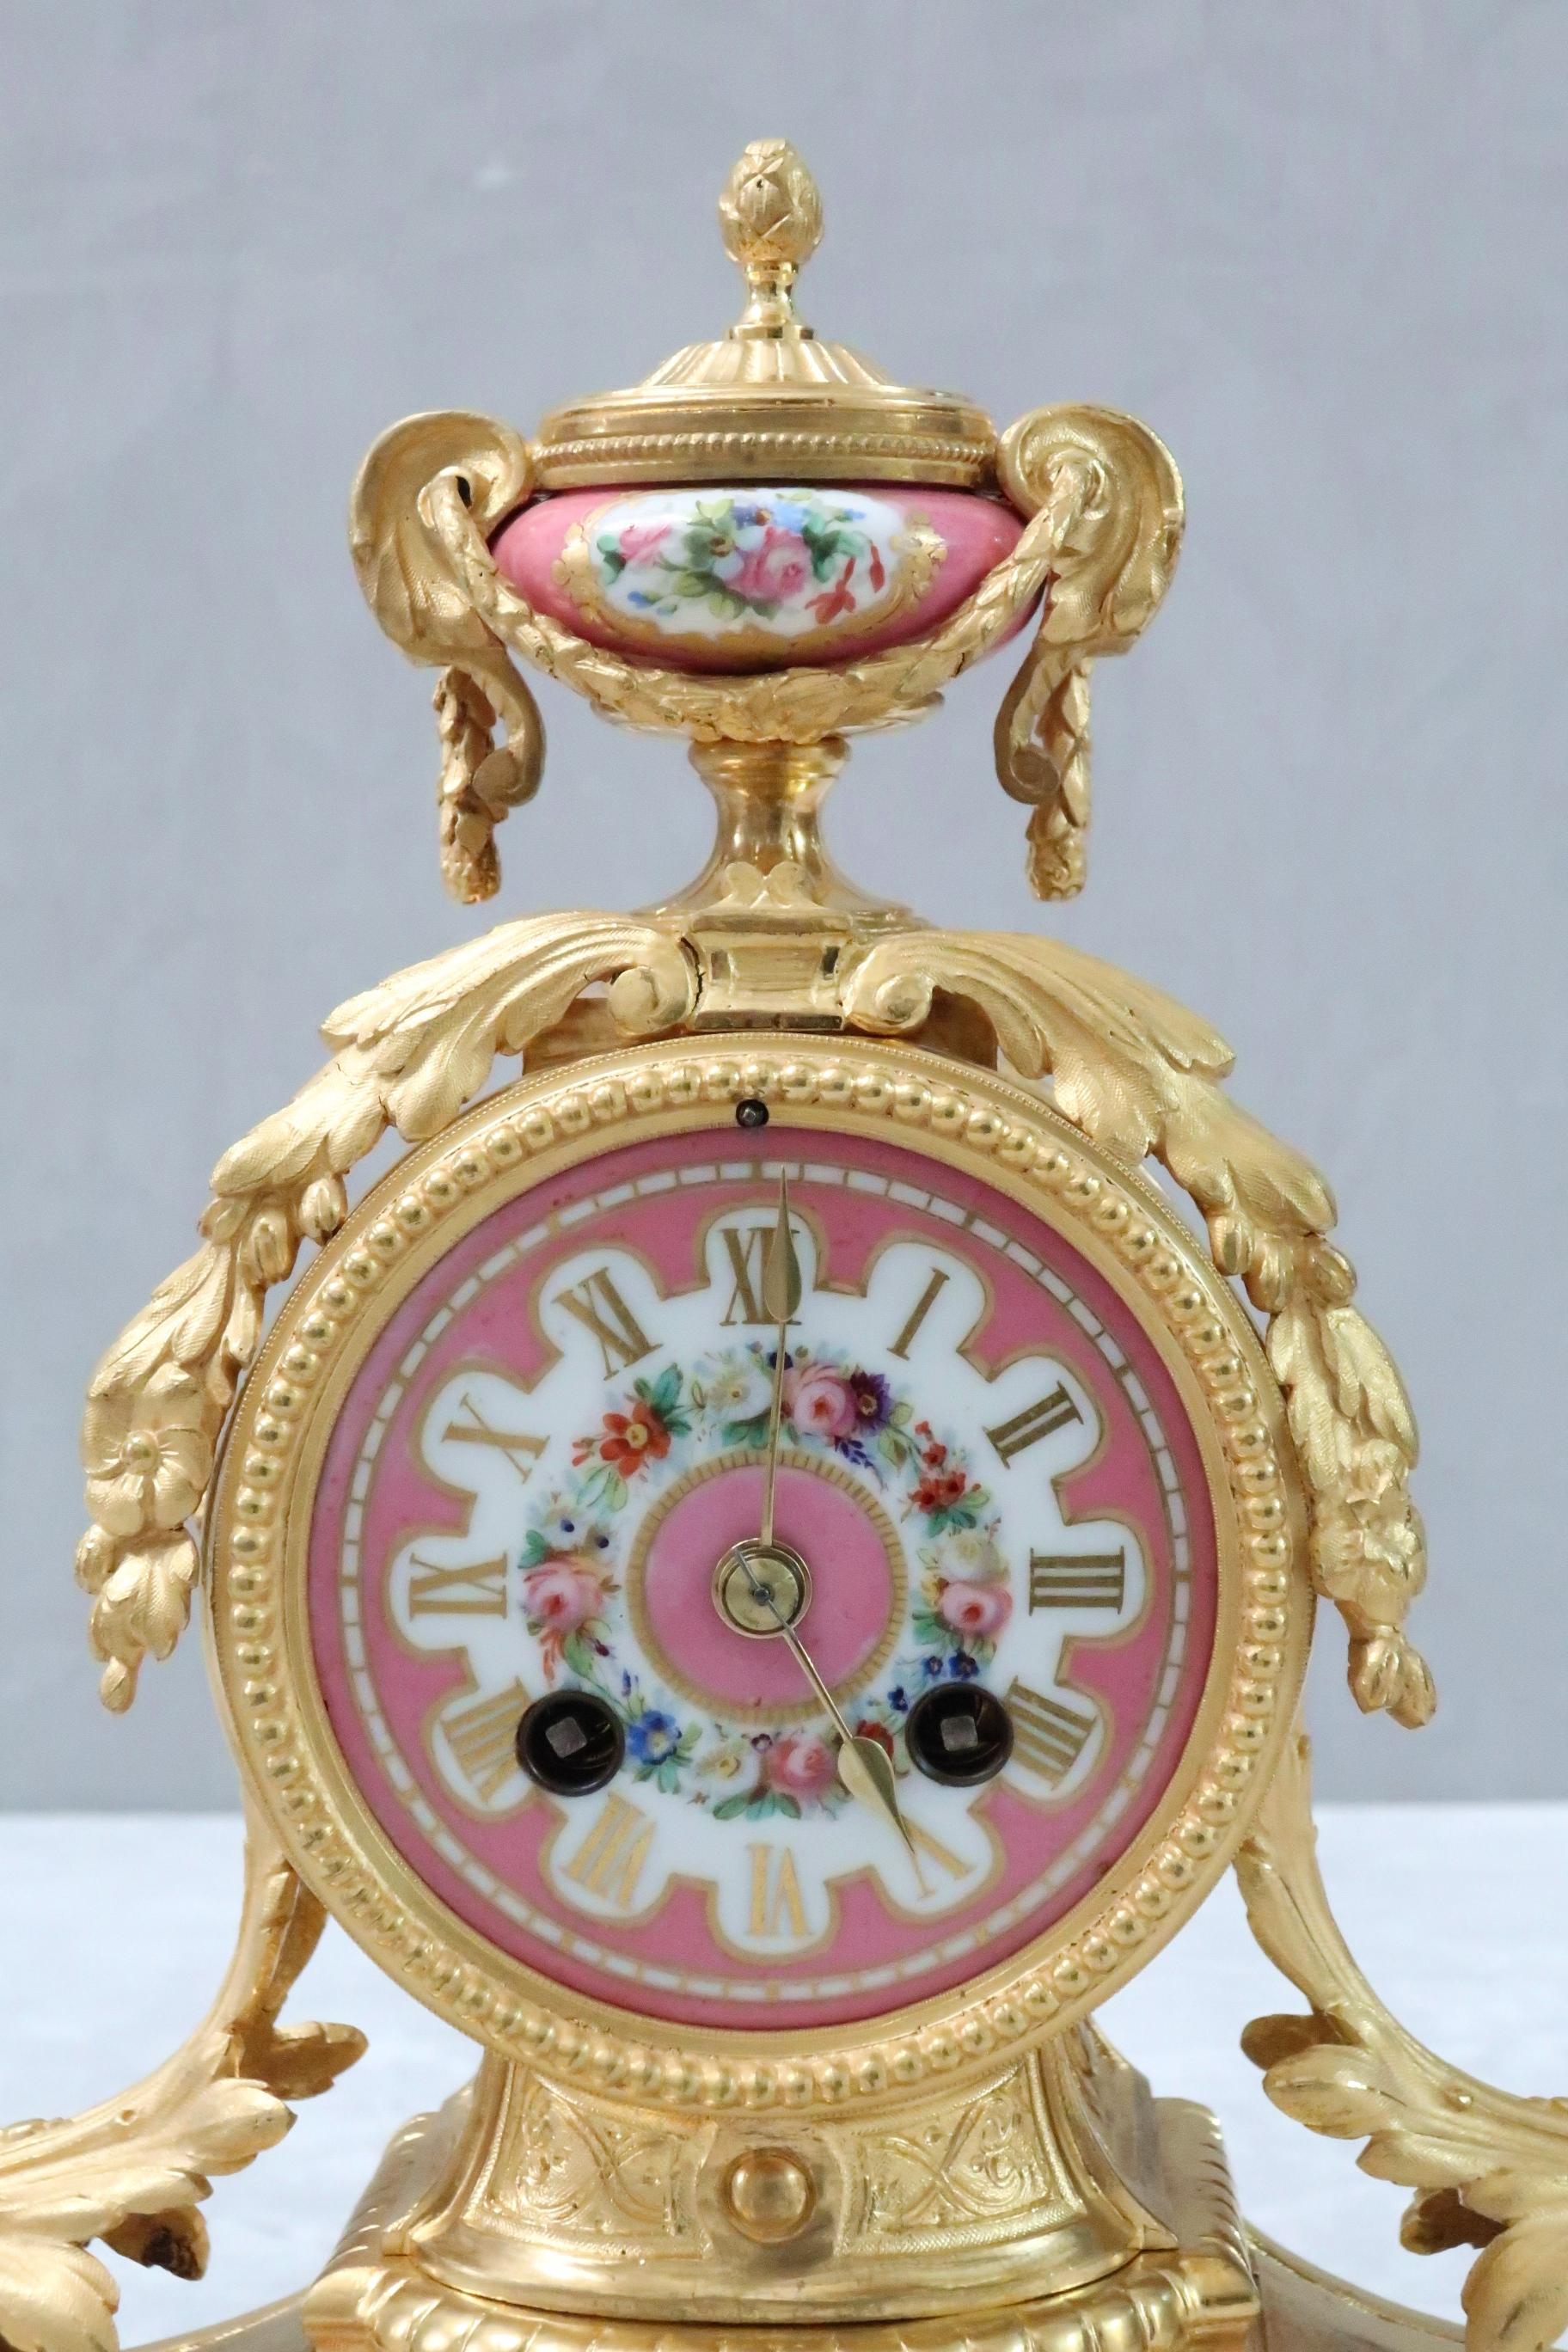 An extremely fine and decorative French bronze gilt mantel clock with scrolling foliate design throughout, pink sevre style painted porcelain panels finished with urn to the top stood on a shaped gilded wooden base. The clock has an eight day French